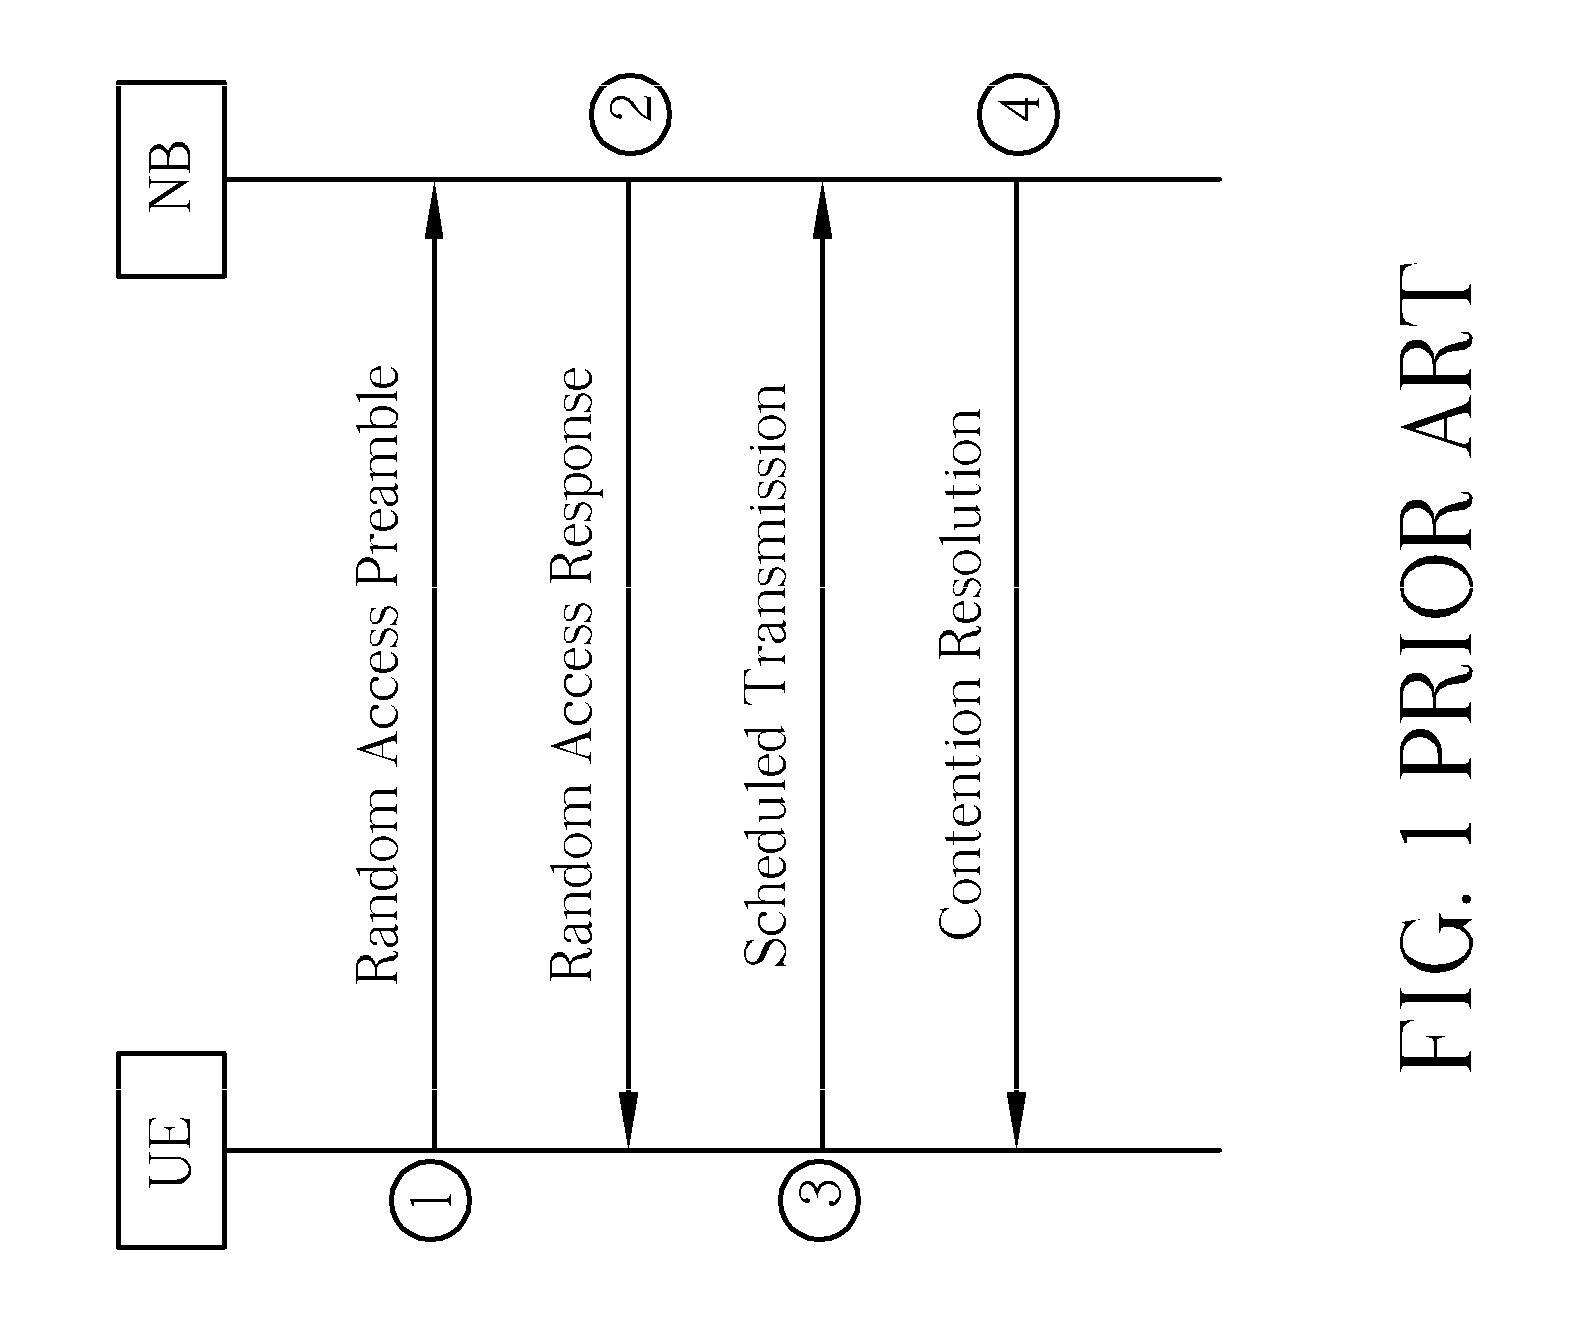 Method and Apparatus for Handling a Contention-Based Random Access Procedure